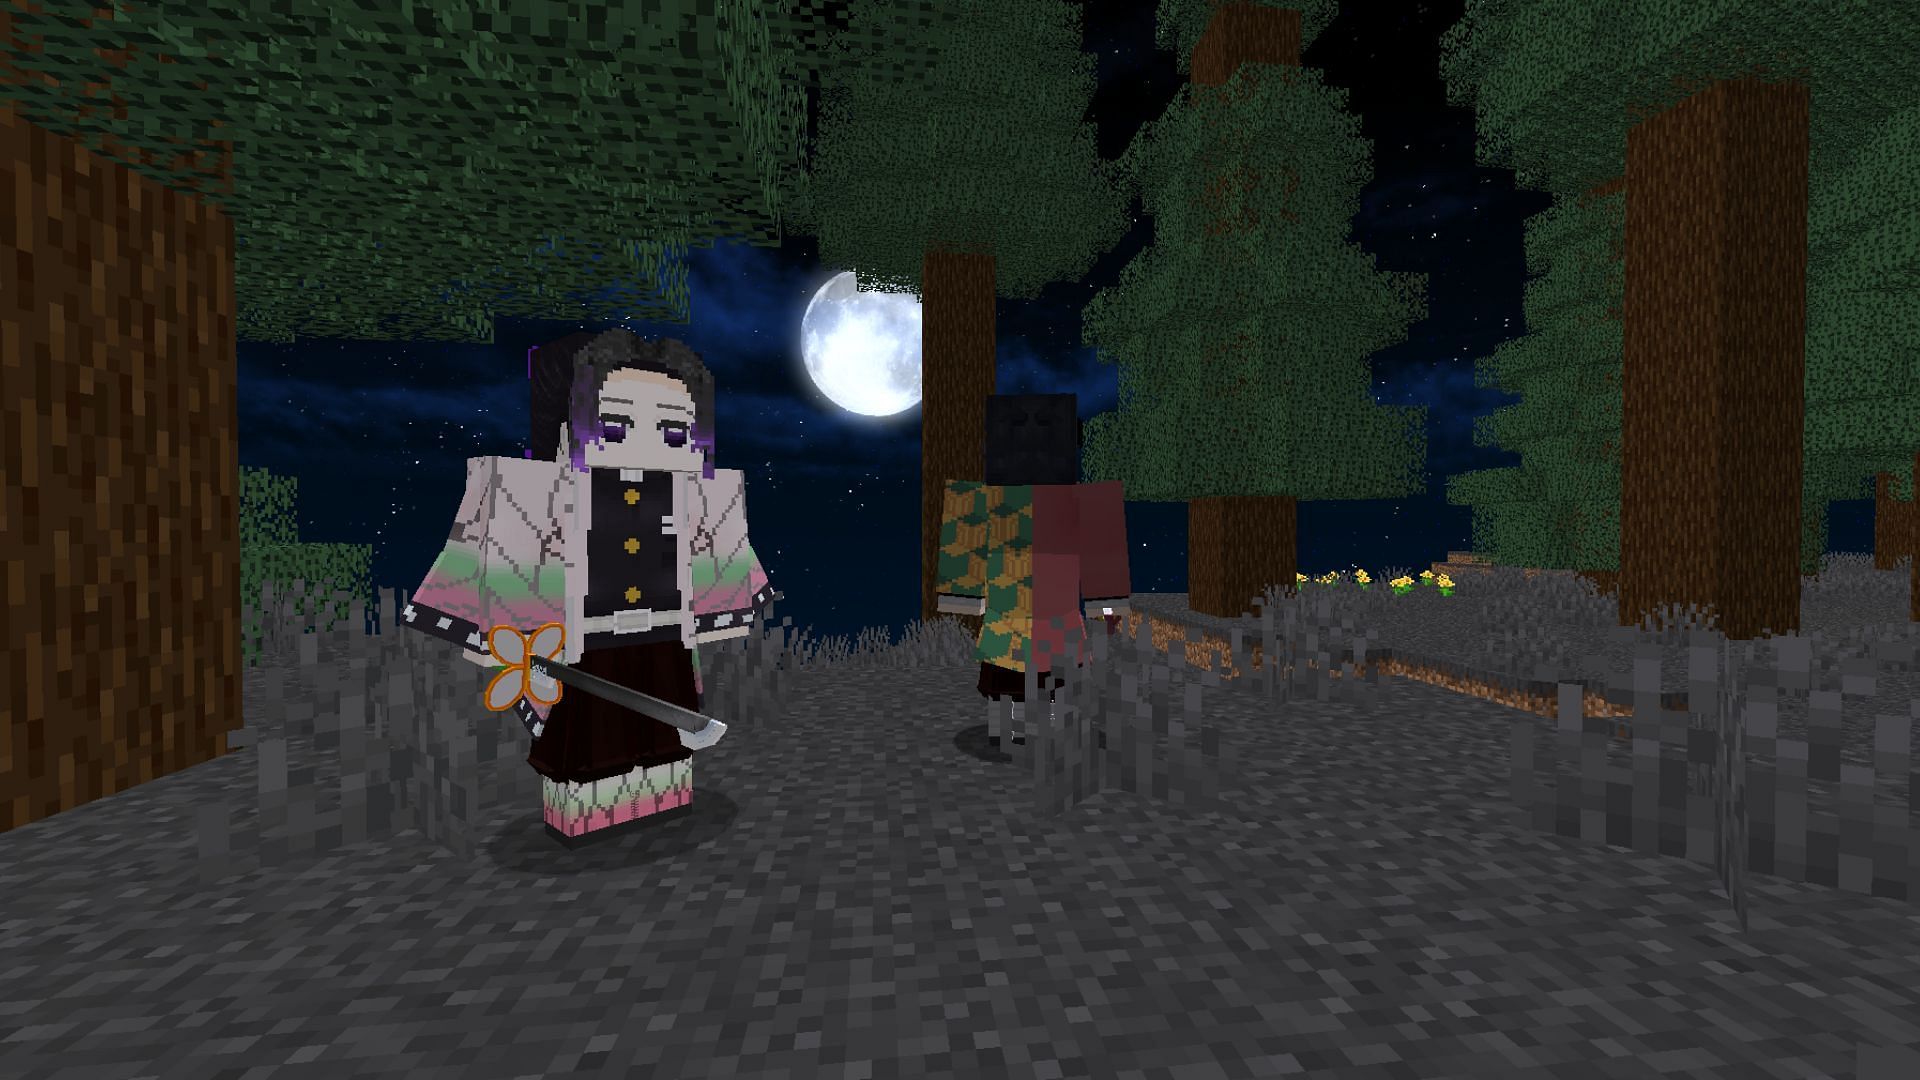 This Demon Slayer mod is one of the most popular mods for Minecraft (Image via CurseForge)